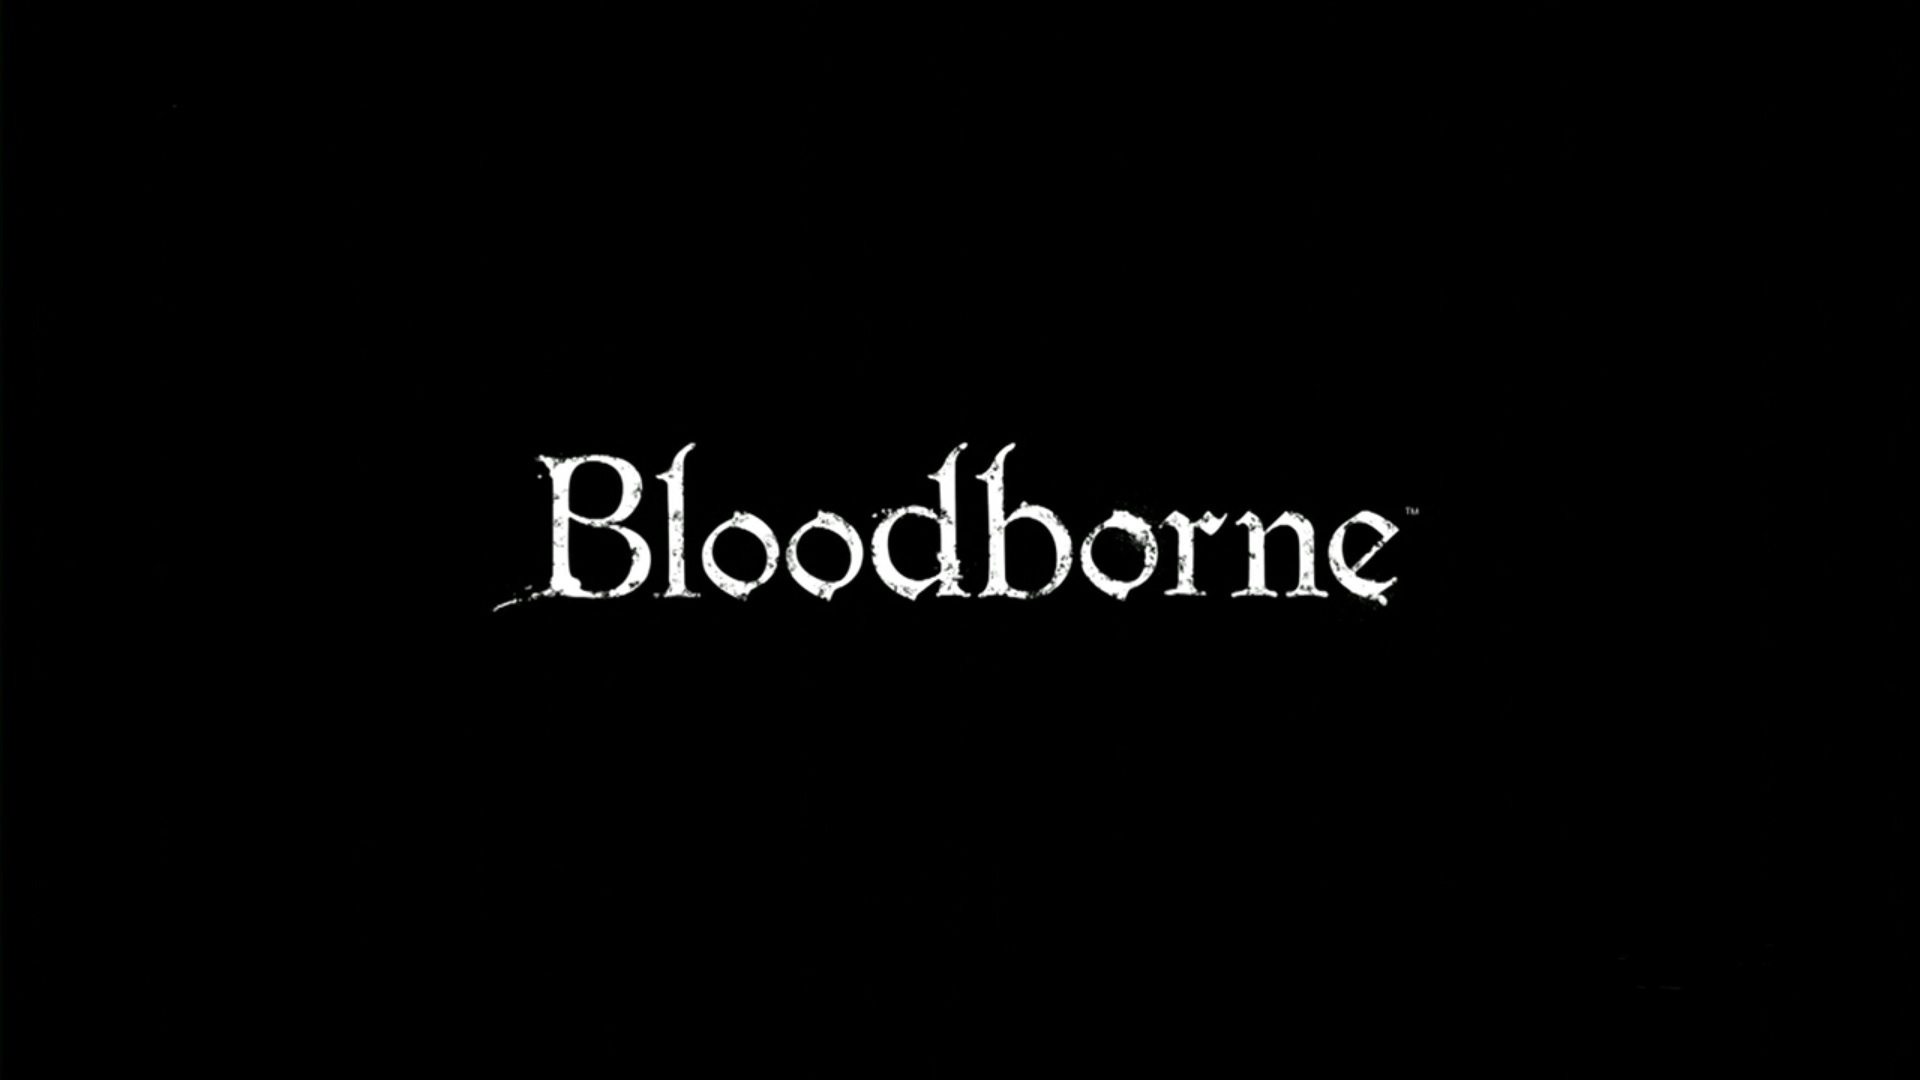 New and unpublished Bloodborne trailer leaks